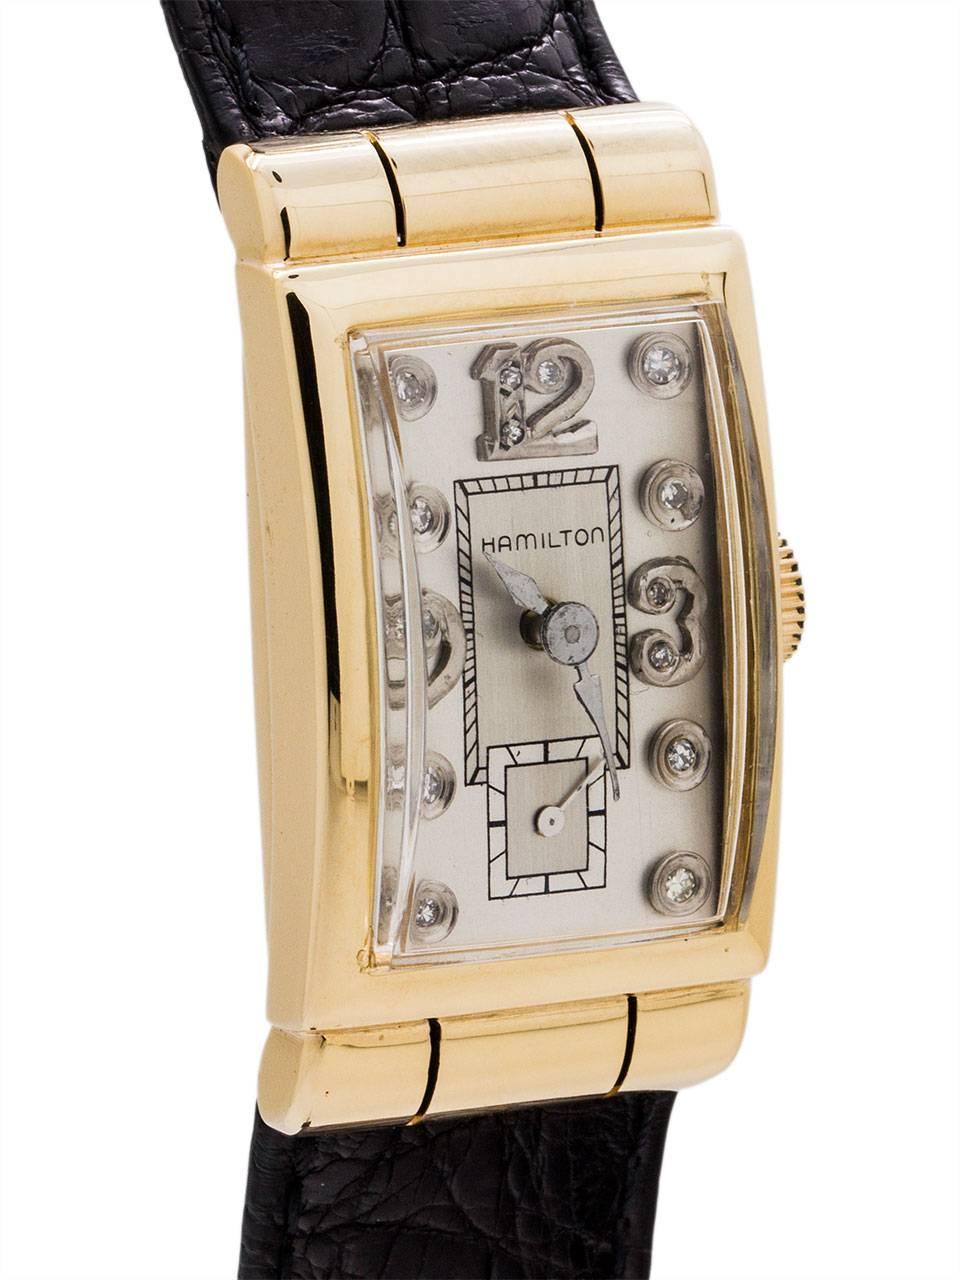 
Vintage Hamilton14K YG hooded case diamond set “tuxedo” model circa 1950’s. Featuring a 21 x 40mm rectangular curved style case with with “fluted” hoods design at top and bottom. With beautifully restored 2 tone silver satin dial with applied